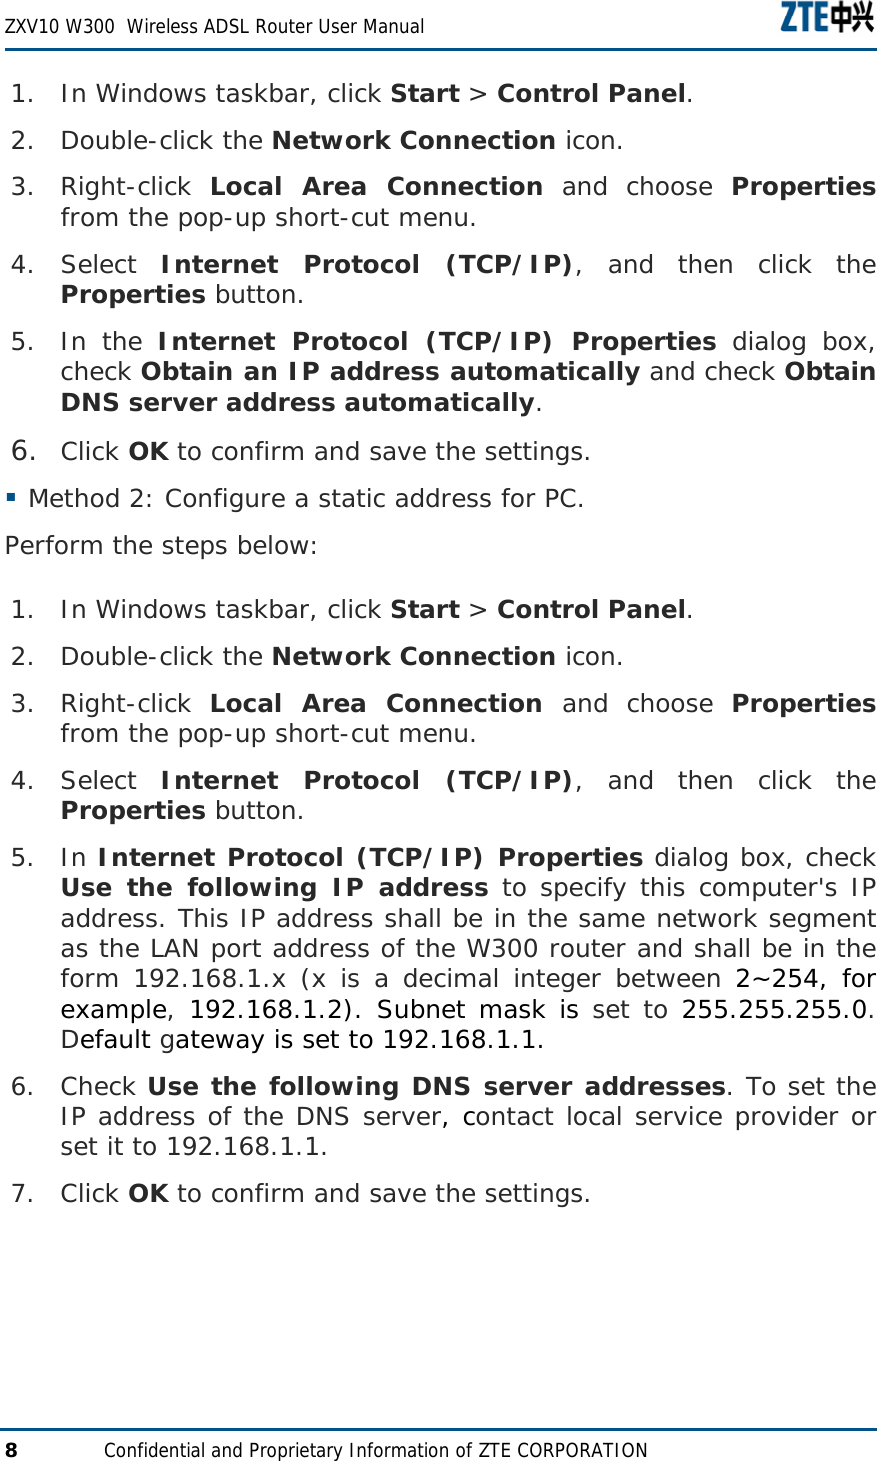  ZXV10 W300  Wireless ADSL Router User Manual  8  Confidential and Proprietary Information of ZTE CORPORATION 1. In Windows taskbar, click Start &gt; Control Panel. 2. Double-click the Network Connection icon. 3. Right-click  Local Area Connection and choose Properties from the pop-up short-cut menu. 4. Select  Internet Protocol (TCP/IP), and then click the Properties button. 5. In the Internet Protocol (TCP/IP) Properties dialog box, check Obtain an IP address automatically and check Obtain DNS server address automatically. 6. Click OK to confirm and save the settings.  Method 2: Configure a static address for PC. Perform the steps below: 1. In Windows taskbar, click Start &gt; Control Panel. 2. Double-click the Network Connection icon. 3. Right-click  Local Area Connection and choose Properties from the pop-up short-cut menu. 4. Select  Internet Protocol (TCP/IP), and then click the Properties button. 5. In Internet Protocol (TCP/IP) Properties dialog box, check Use the following IP address to specify this computer&apos;s IP address. This IP address shall be in the same network segment as the LAN port address of the W300 router and shall be in the form 192.168.1.x (x is a decimal integer between 2~254, for example, 192.168.1.2). Subnet mask is set to 255.255.255.0. Default gateway is set to 192.168.1.1. 6. Check Use the following DNS server addresses. To set the IP address of the DNS server, contact local service provider or set it to 192.168.1.1. 7. Click OK to confirm and save the settings.   